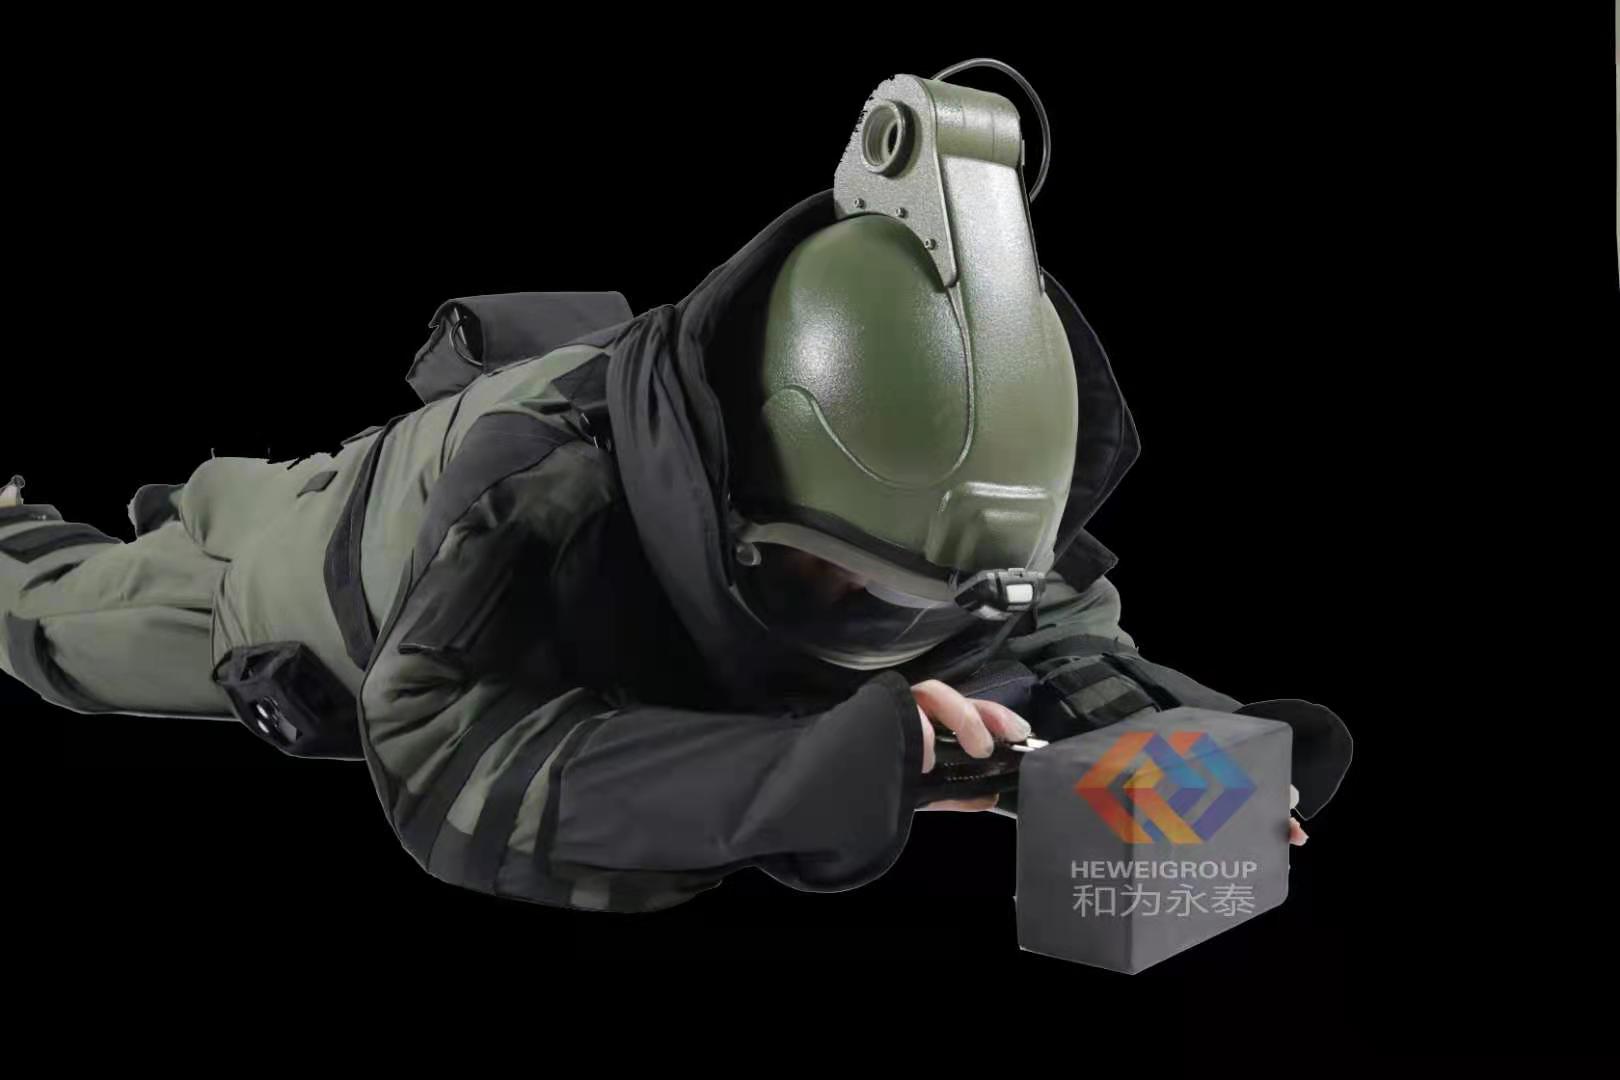 Hot sale Hook Line And Sinker Fisherman\\\\\\\\\\\\\\\\\\\\\\\\\\\\\\\’s Multi Tool - Police/ Military EOD bomb disposal suit – Heweiyongtai